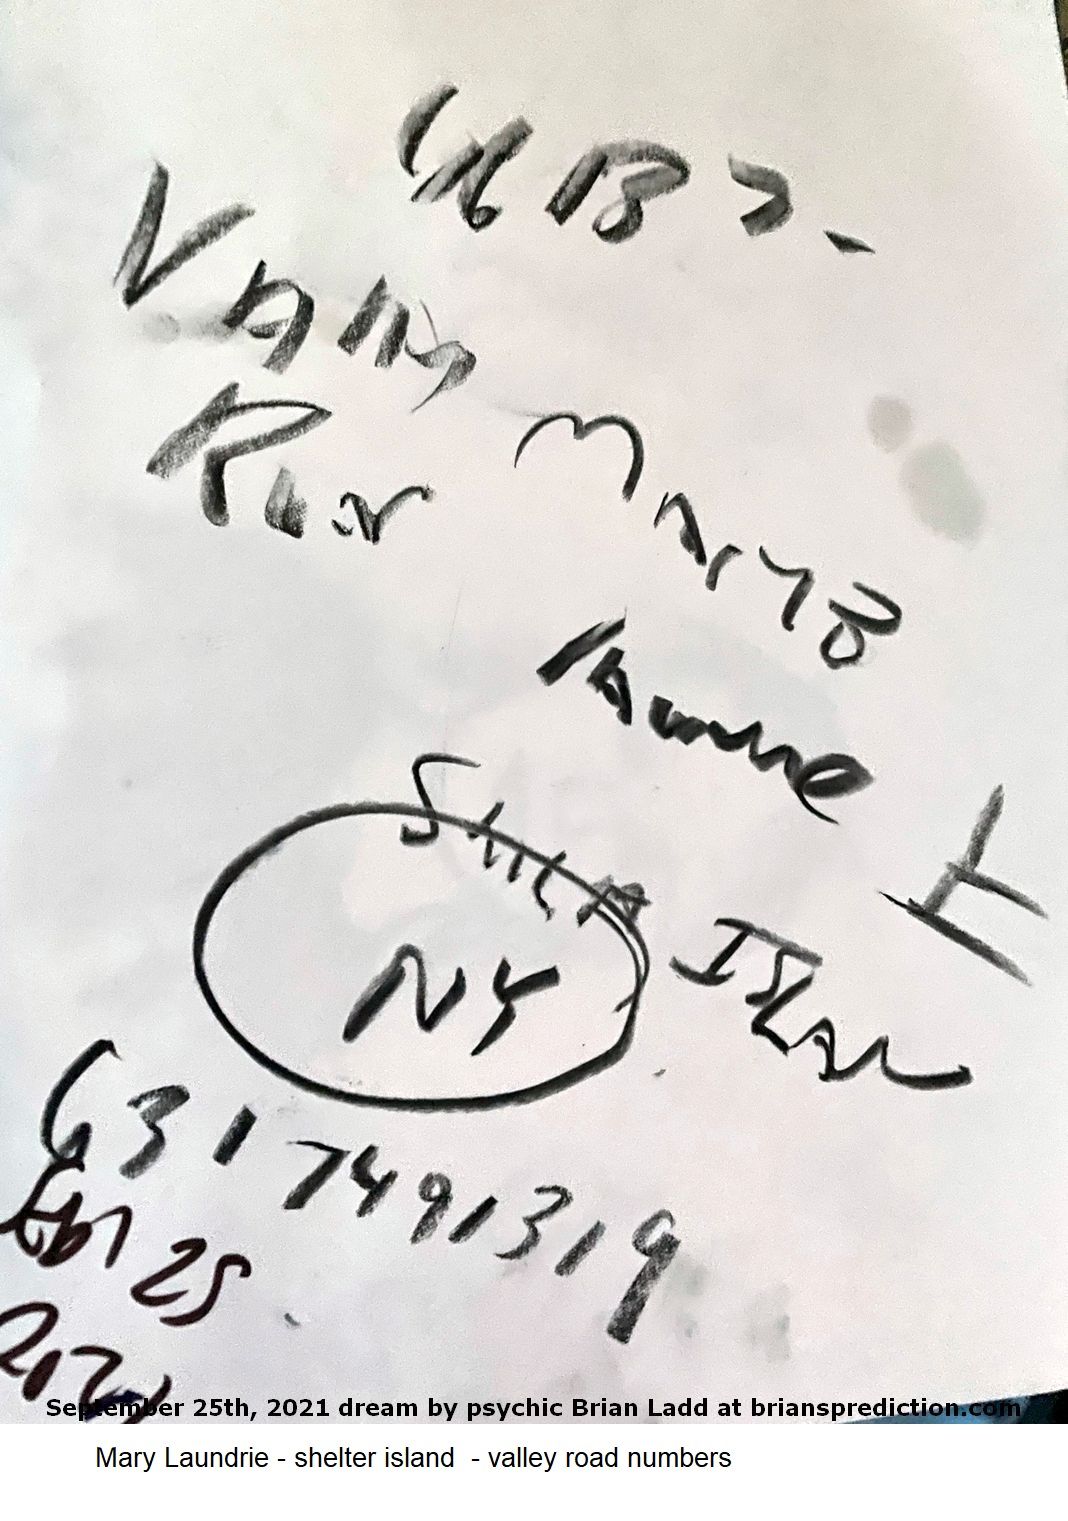 25 Sept 2021 3 Mary Laundrie - shelter island  - valley road numbers...
Mary Laundrie - shelter island  - valley road numbers.  This is the link to my private search operation please do not share this link.   https://briansprediction.com/thumbnails.php?album=17669   This link will not work for the general public and should be hidden from no logged in users and search engines.  I will personally be involved in the Flordia search starting October 1st, 2021 - updates will ONLY be posted in this private area.
